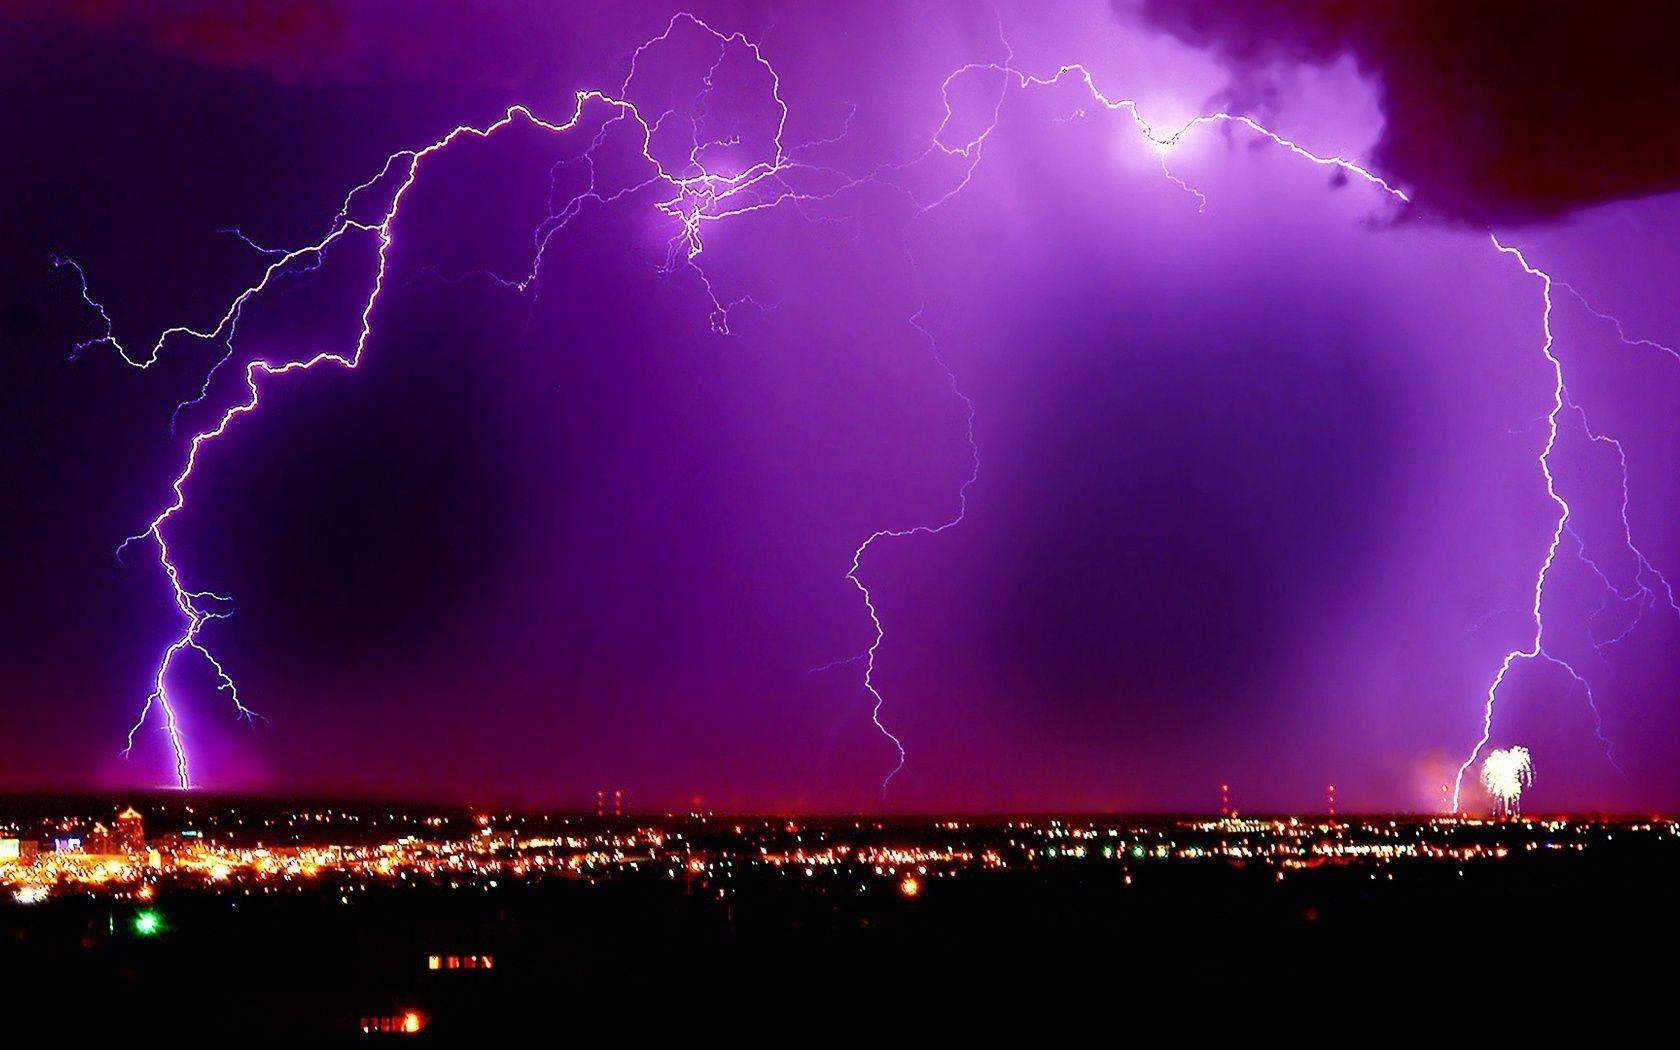 City night purple sky lightning. Android wallpaper for free